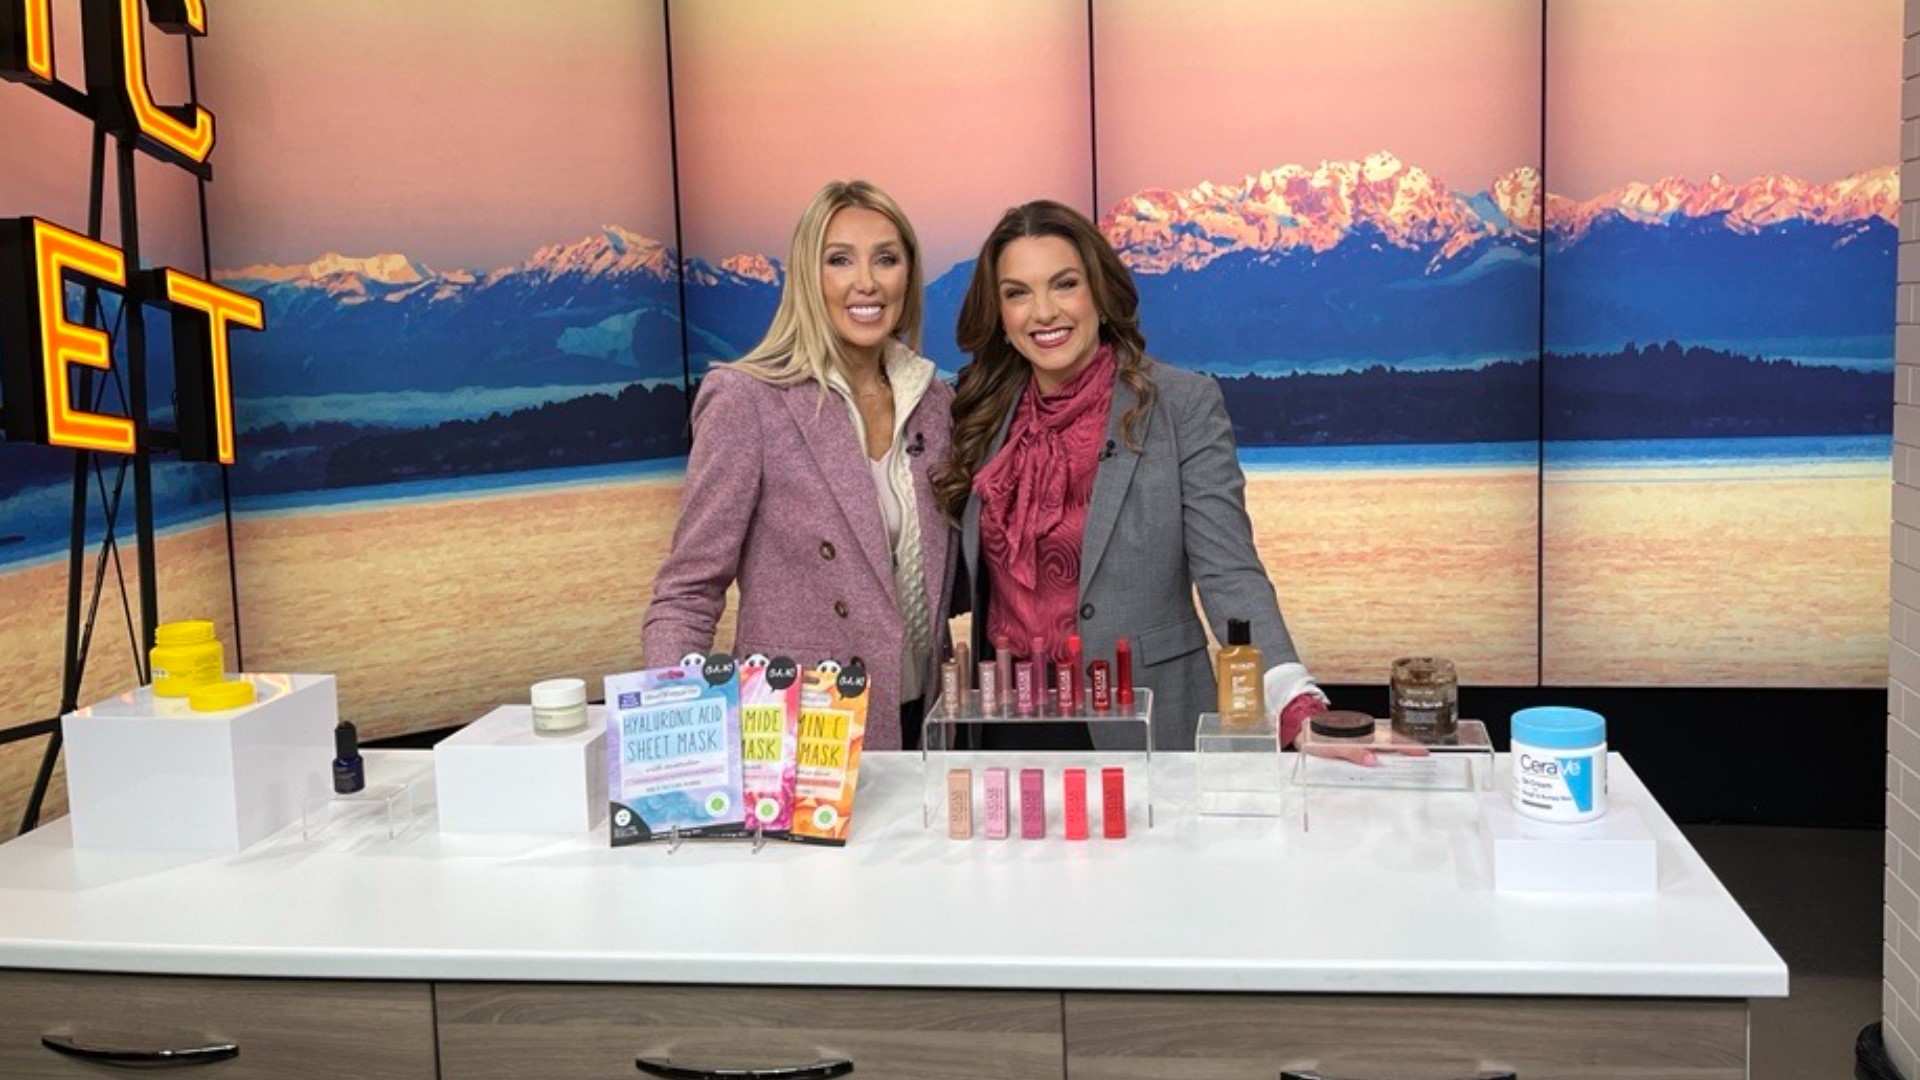 When the weather gets cold, our skin and hair can start to feel parched. Beauty YouTuber Jodi Mannes shares 8 winter beauty essentials that can help keep our glow.